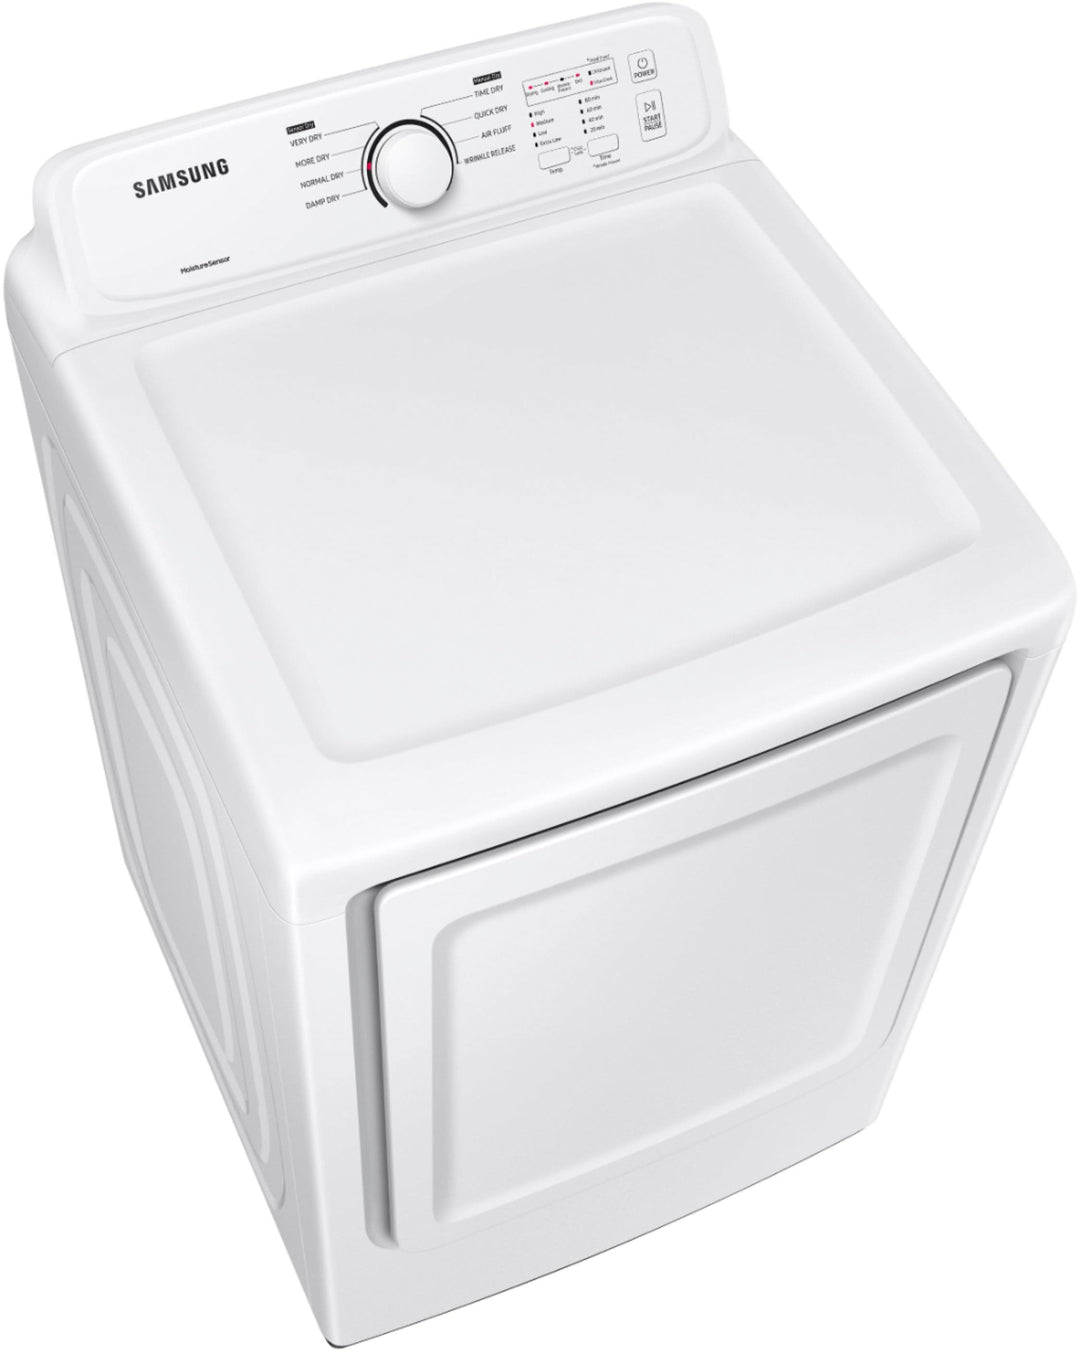 Samsung - 7.2 Cu. Ft. Electric Dryer with Sensor Dry and 8 Drying Cycles - White_6